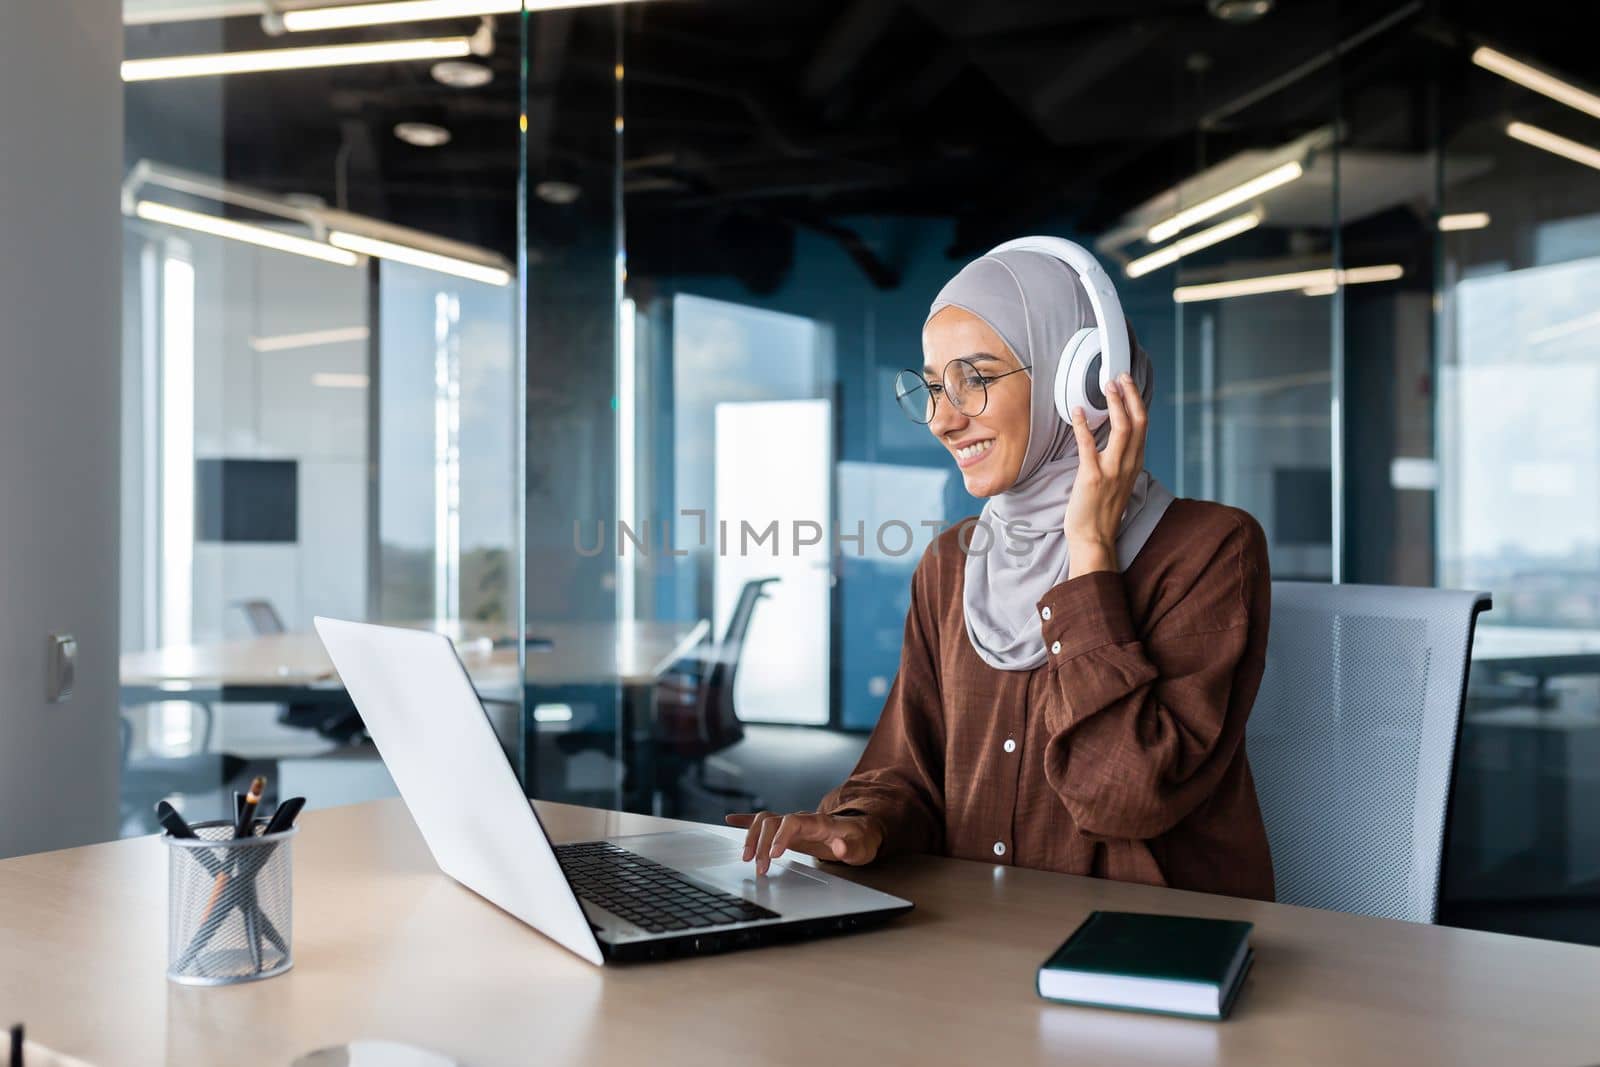 Successful modern businesswoman working inside office with laptop, Muslim woman wearing hijab and headphones listening to audio books and podcasts at workplace, satisfied and successful woman by voronaman